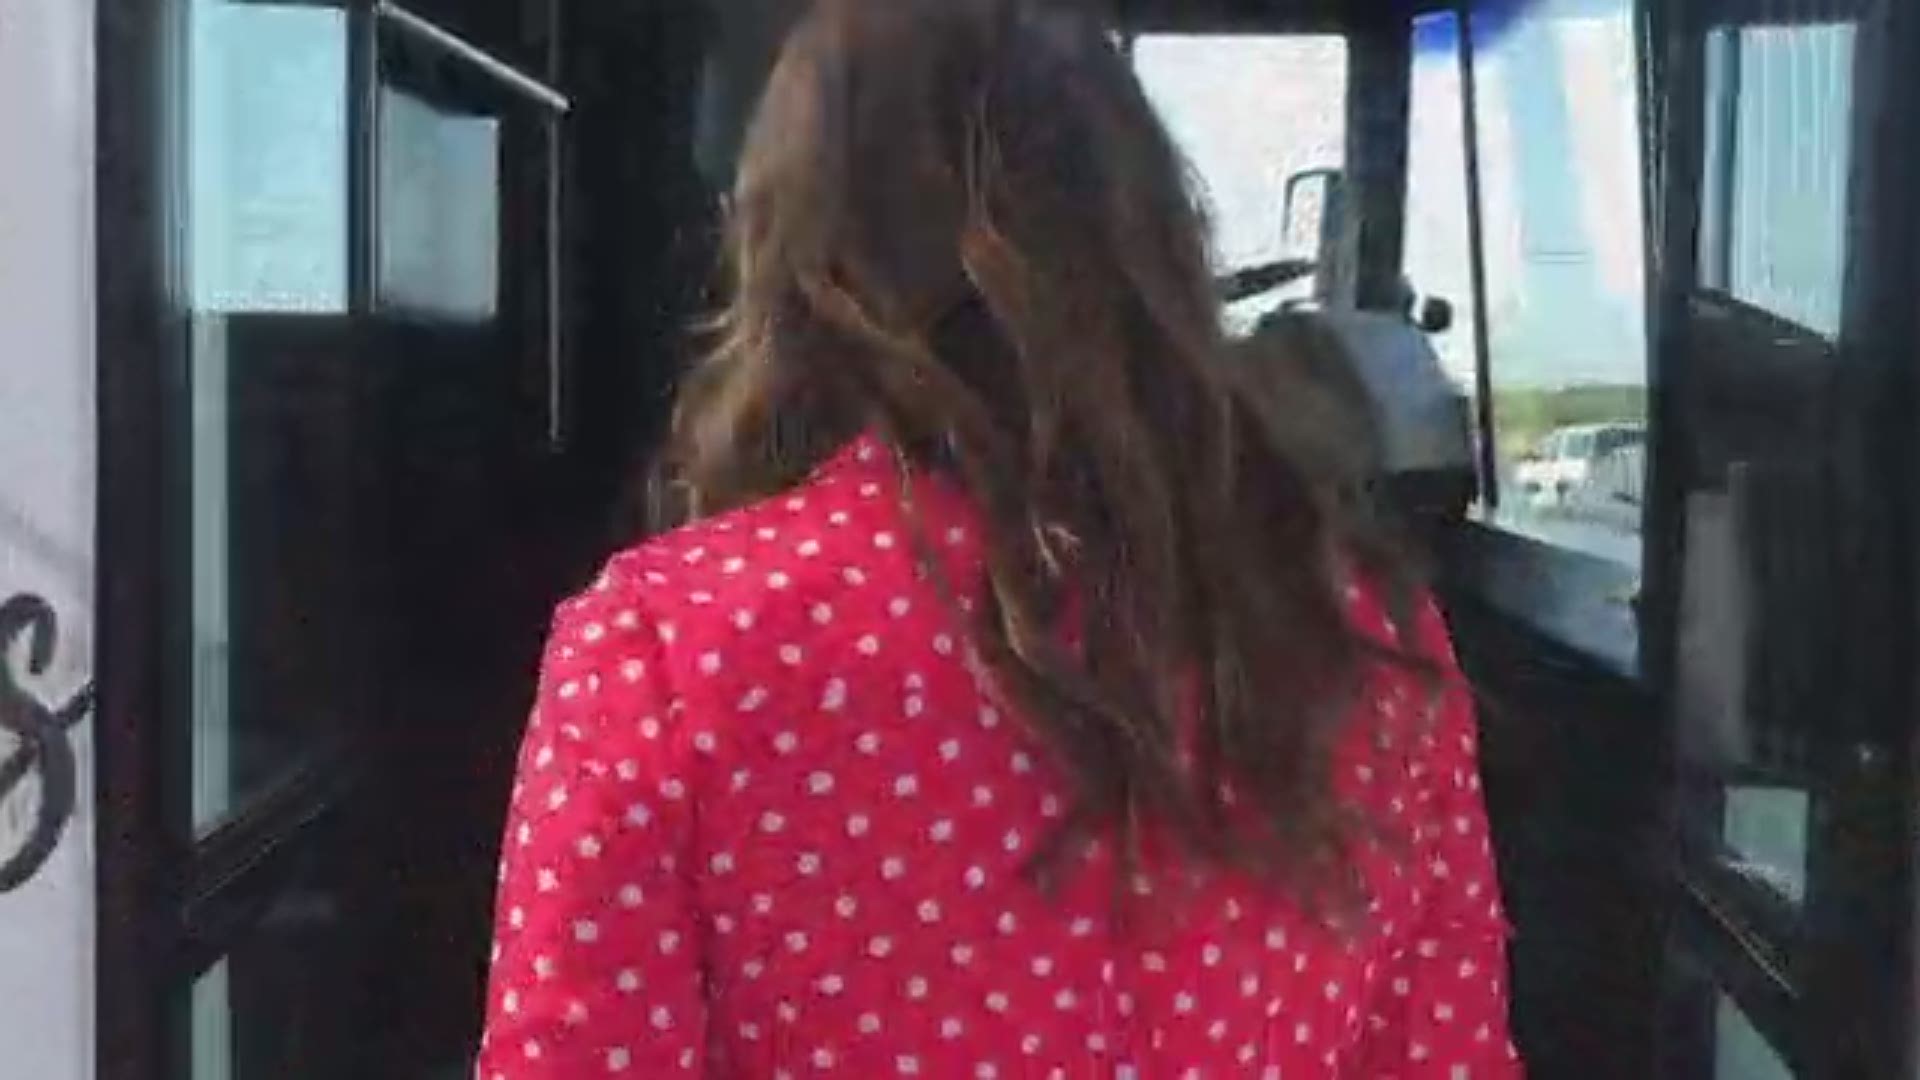 CBS19 takes an inside look at the new Van ISD STEAM Bus that will be used at campuses this fall!